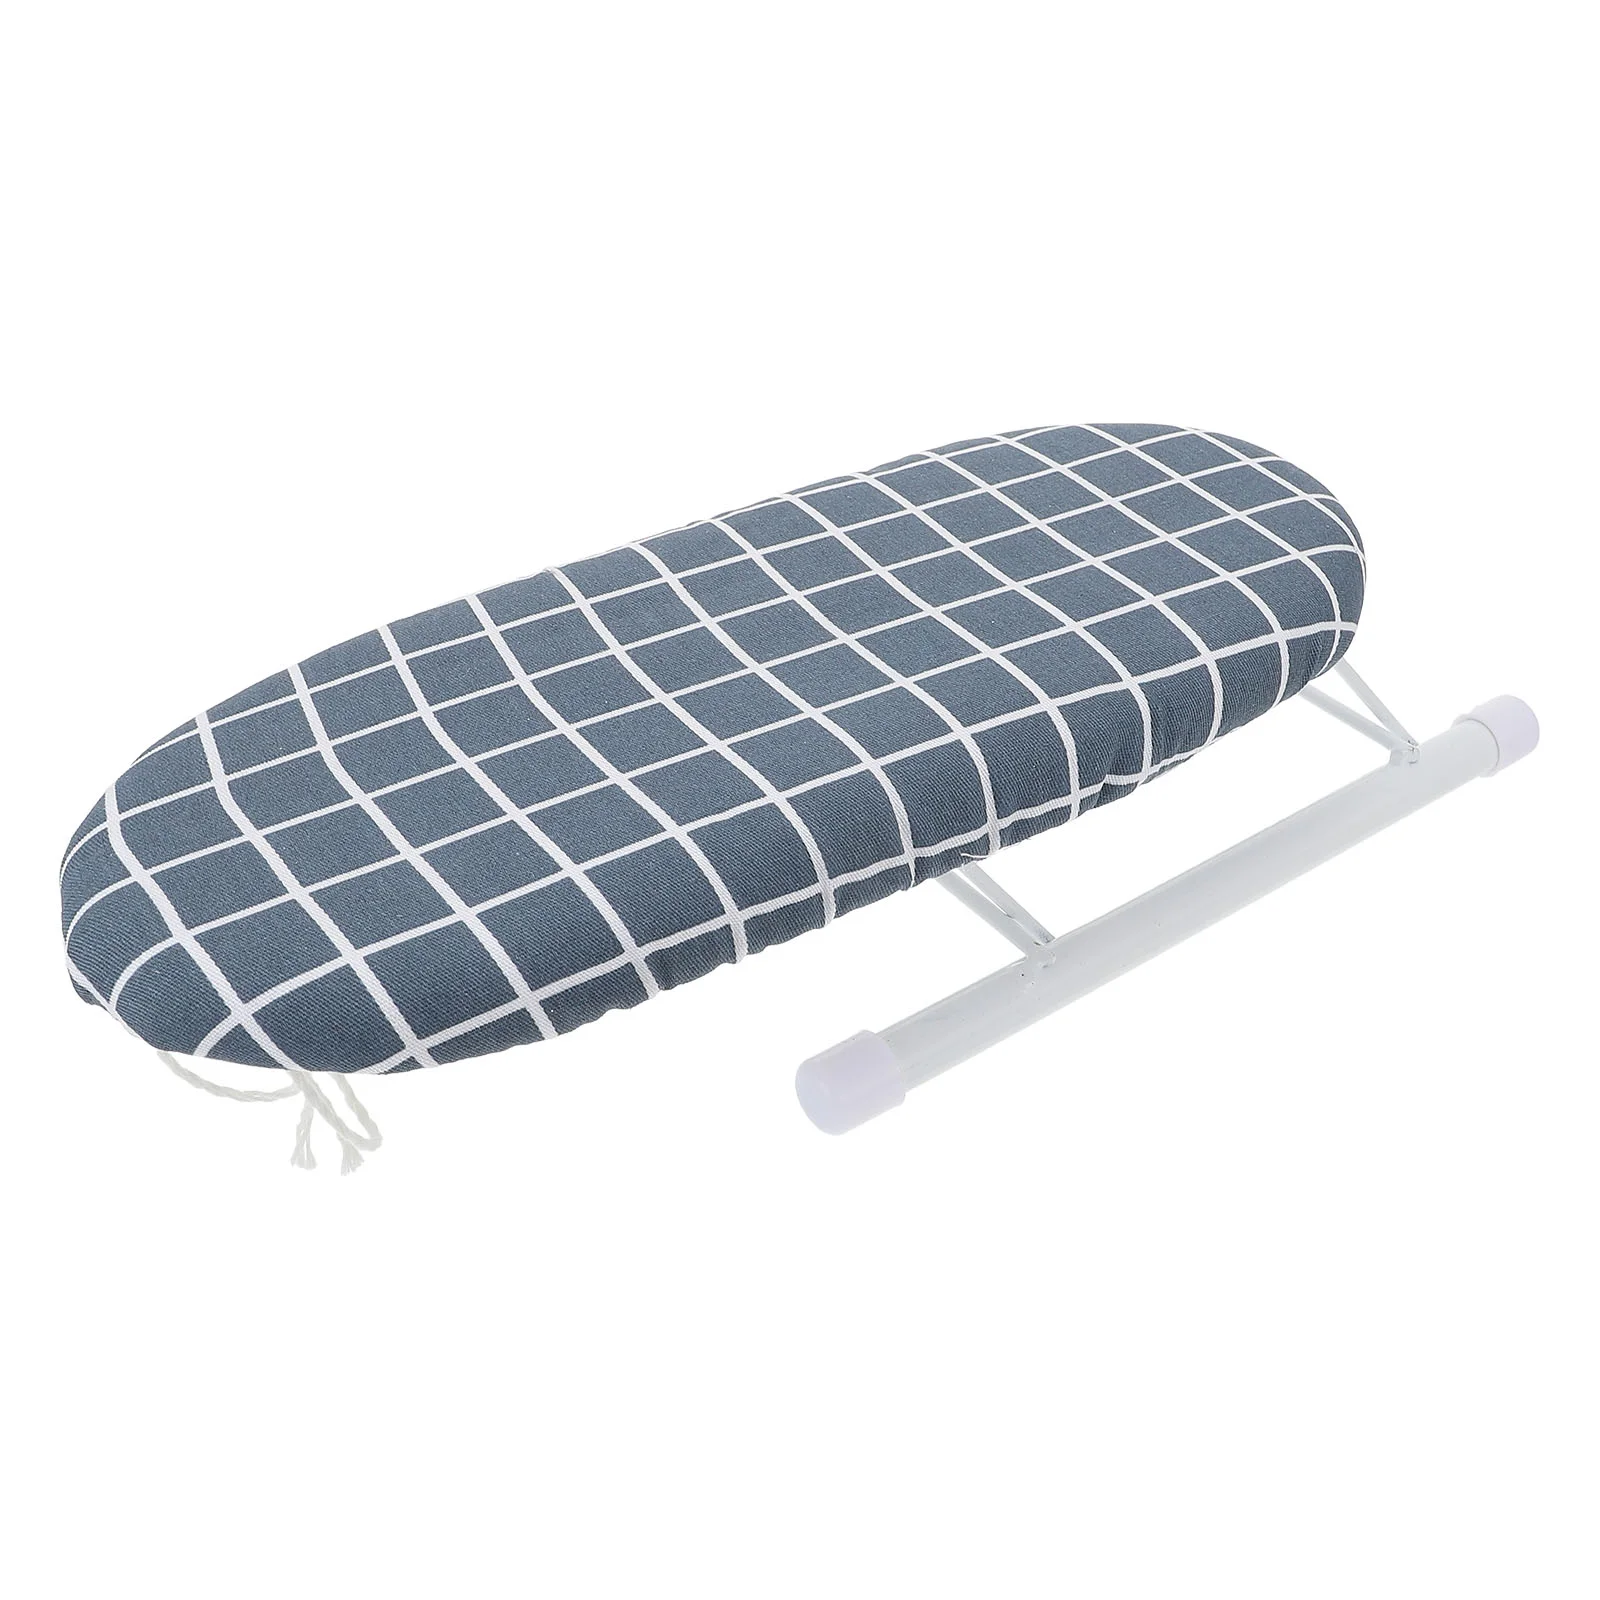 

Ironing Board Mini Iron Portable Tabletop Pad Sewing Table Clothes Folding Countertop Foldable Rest Sleeve Cover Tool Boards